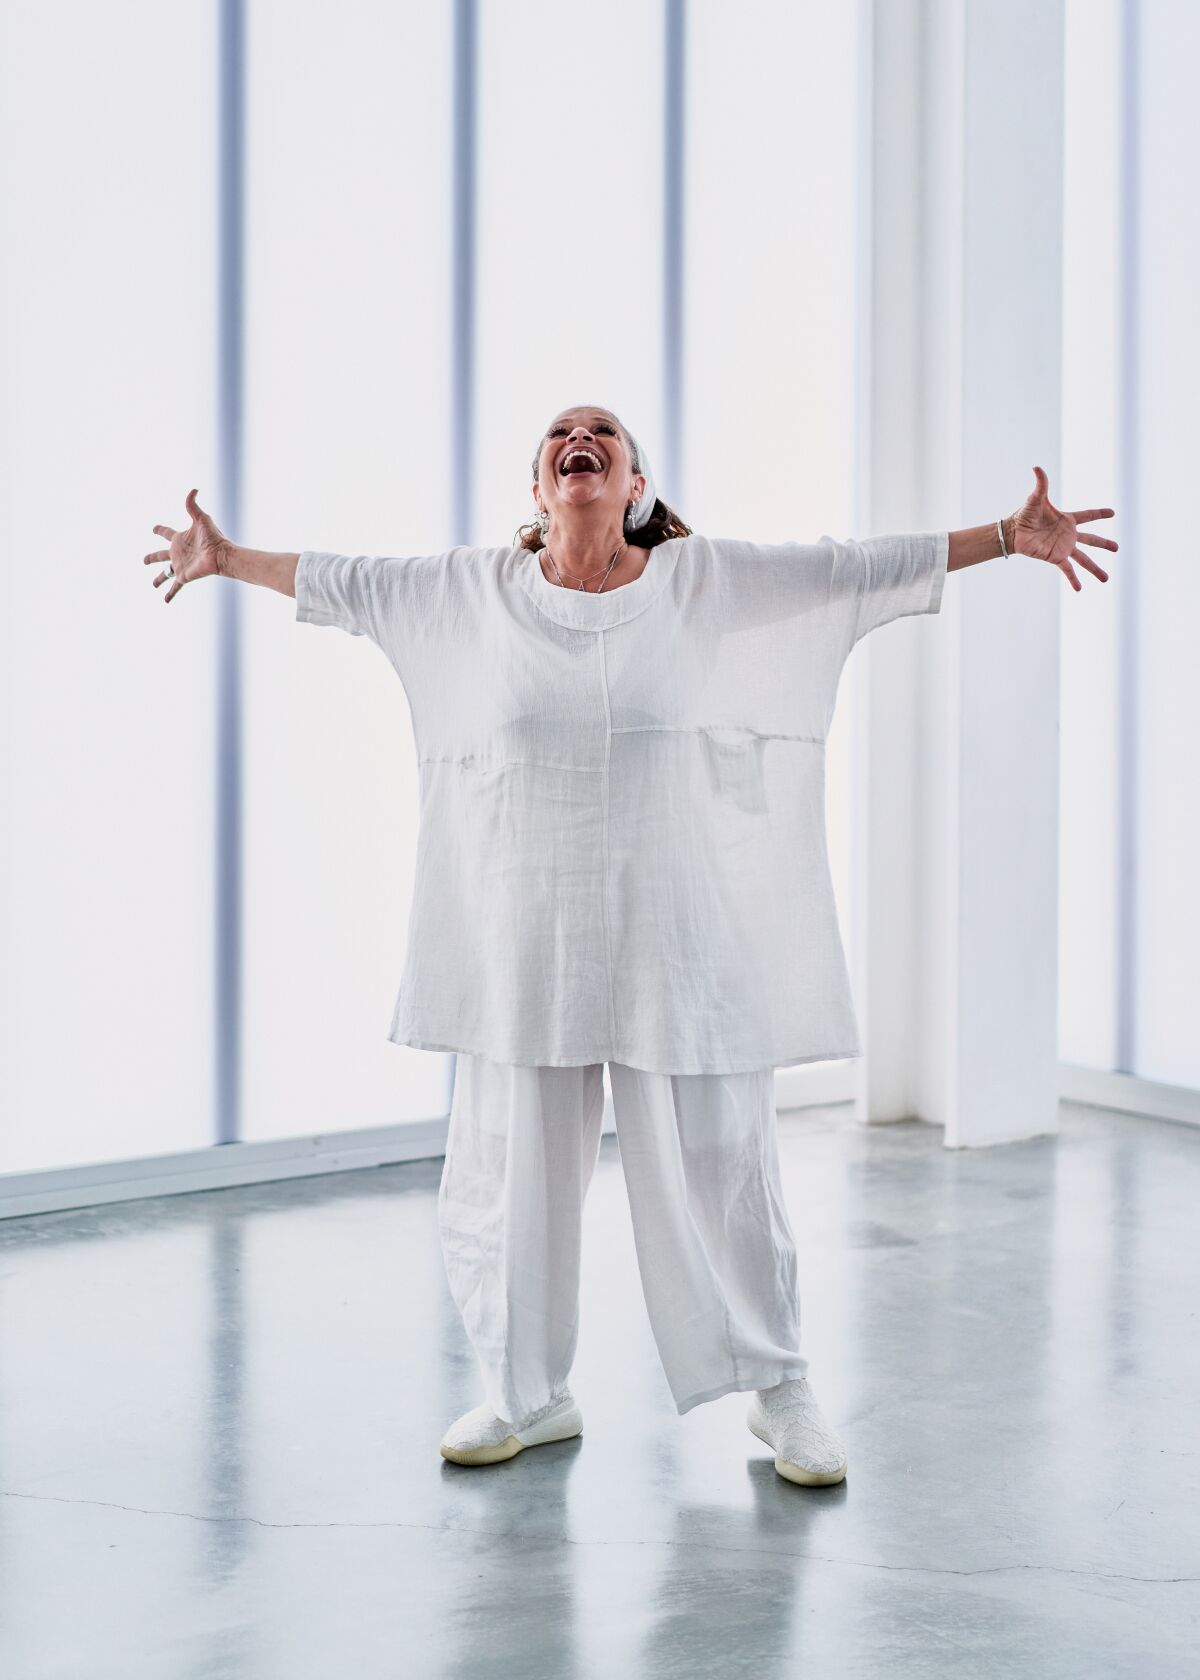 A woman wearing white reaches out her arms to her side in an expression of joy.